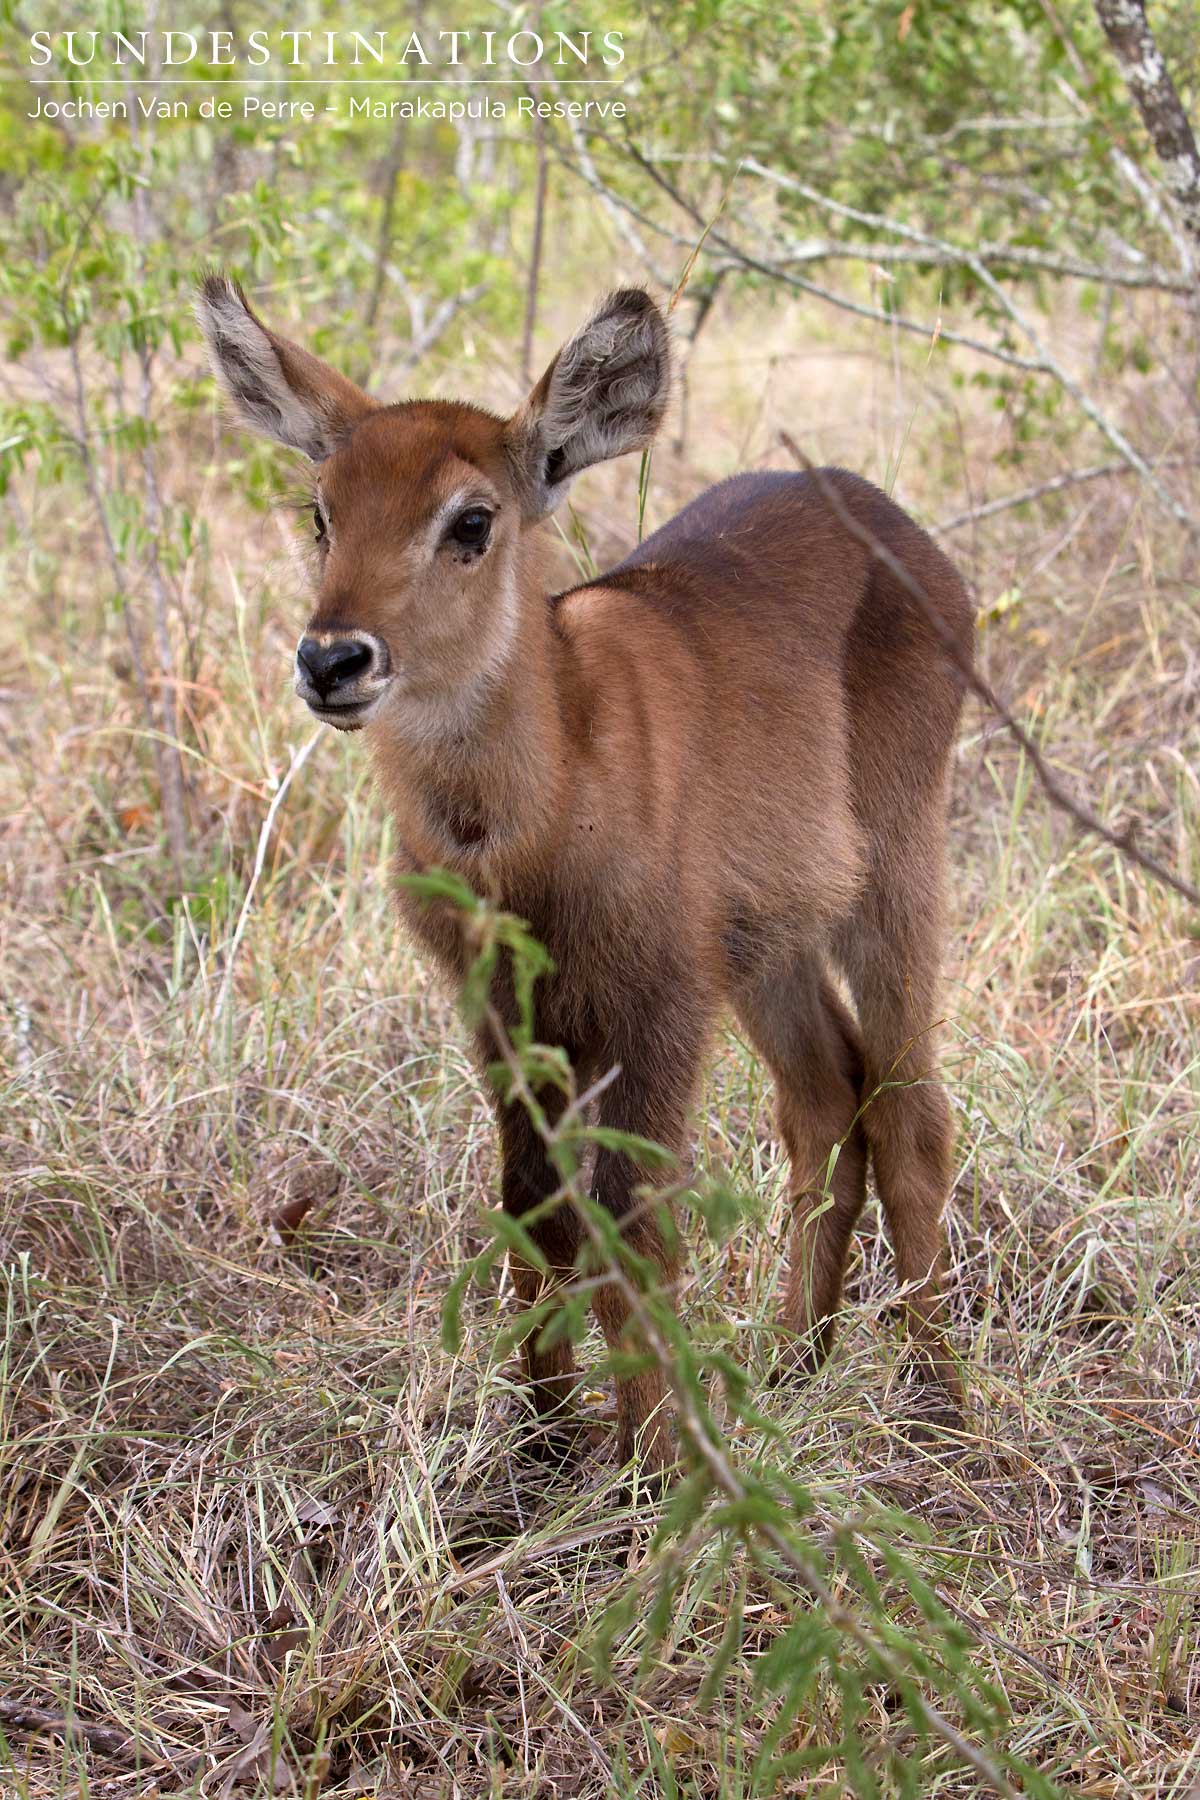 An unfortunate baby waterbuck waits for its mother